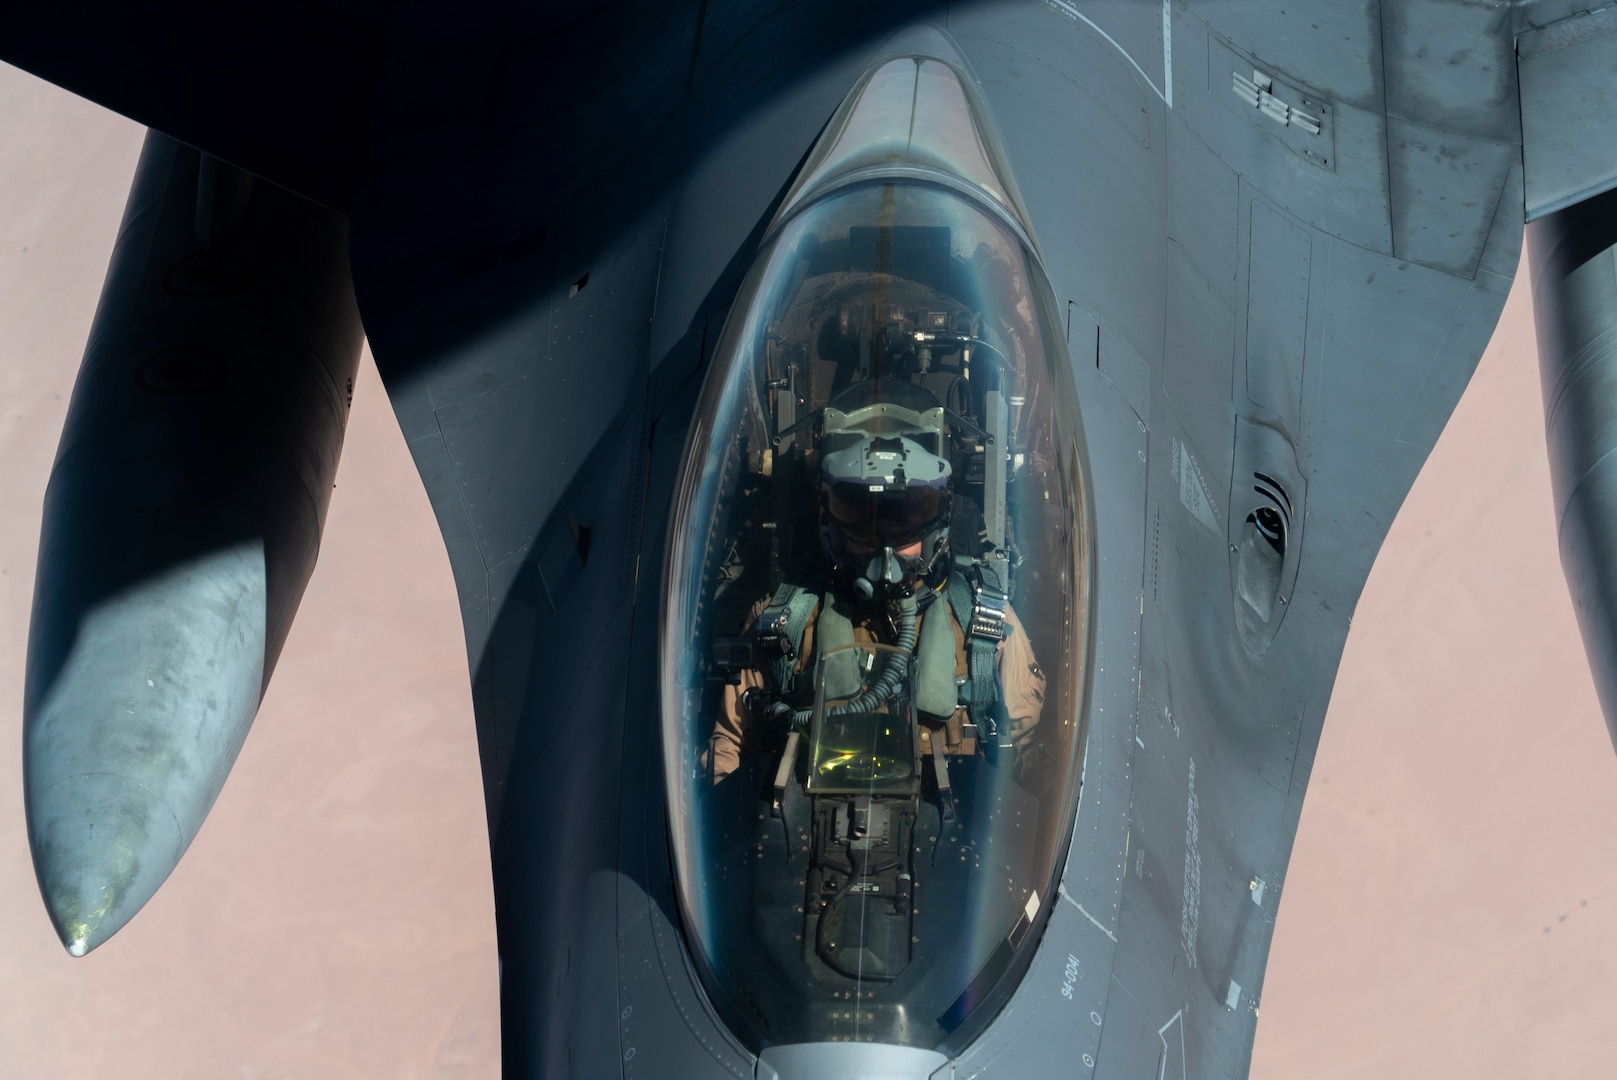 U.S. Air Force F-16 Fighting Falcon is aerial refueled by a KC-135 “Stratotanker” over the U.S. Central Command area of responsibility Dec. 30, 2020 as part of an escort mission in support of the B-52 “Stratofortress” deployment. The short-notice deployment underscores the U.S. military's commitment to regional security and demonstrates a unique ability to rapidly deploy overwhelming combat power on short notice.  The B-52H is a long-range, heavy bomber that is capable of flying at high subsonic speeds at altitudes of up to 50,000 feet and provides the United States with immediate global strike capability.  (U.S. Air Force photo by Senior Airman Roslyn Ward)